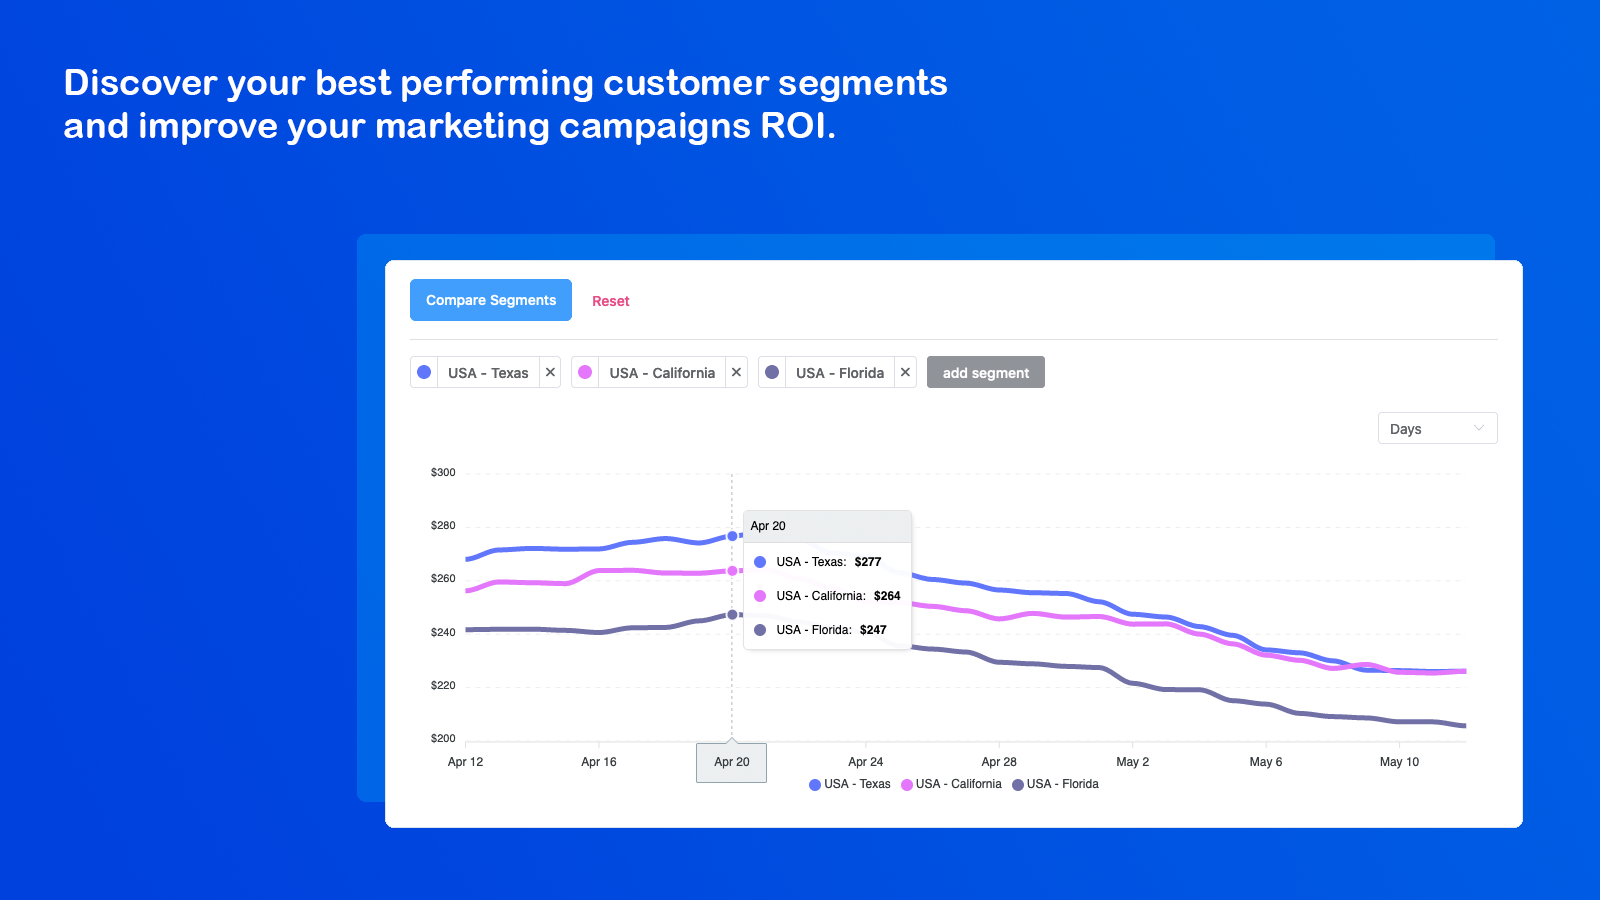 Discover your best performing customer segments to improve ROI